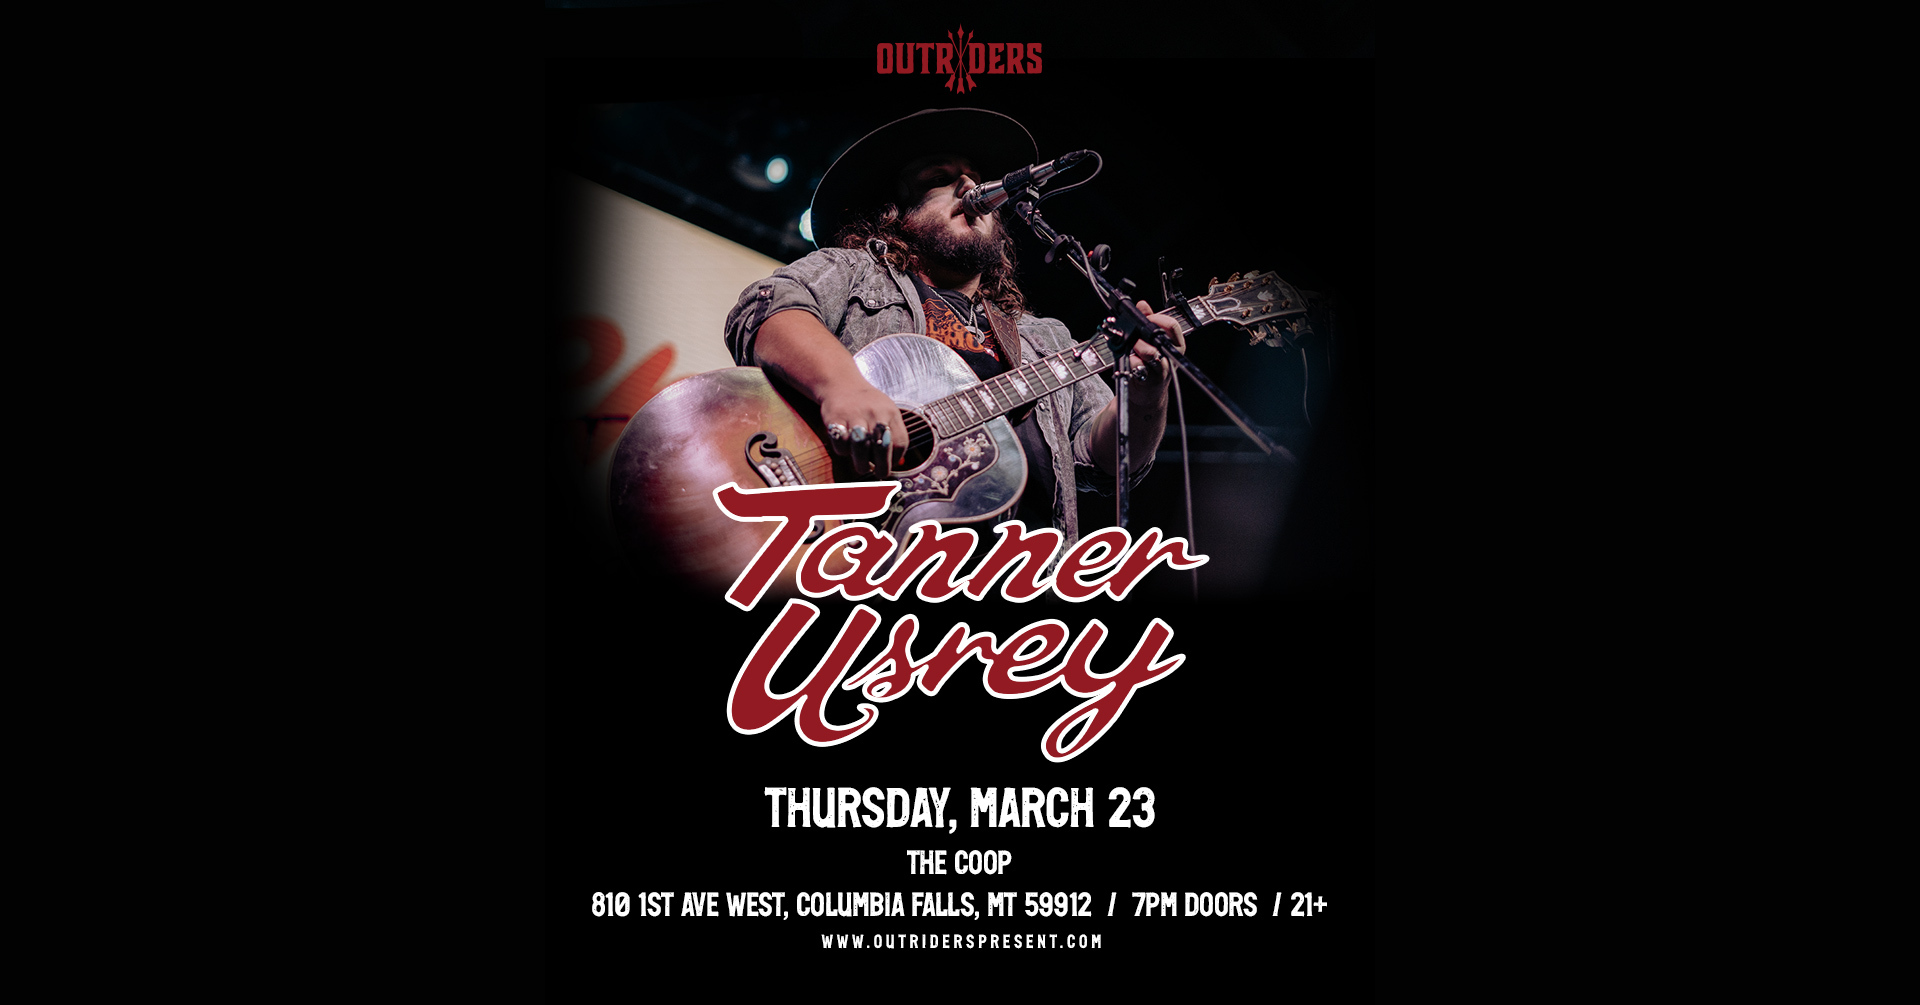 Outriders Present Tanner Usrey at The Coop in Columbia Falls, Montana on March 23, 2023